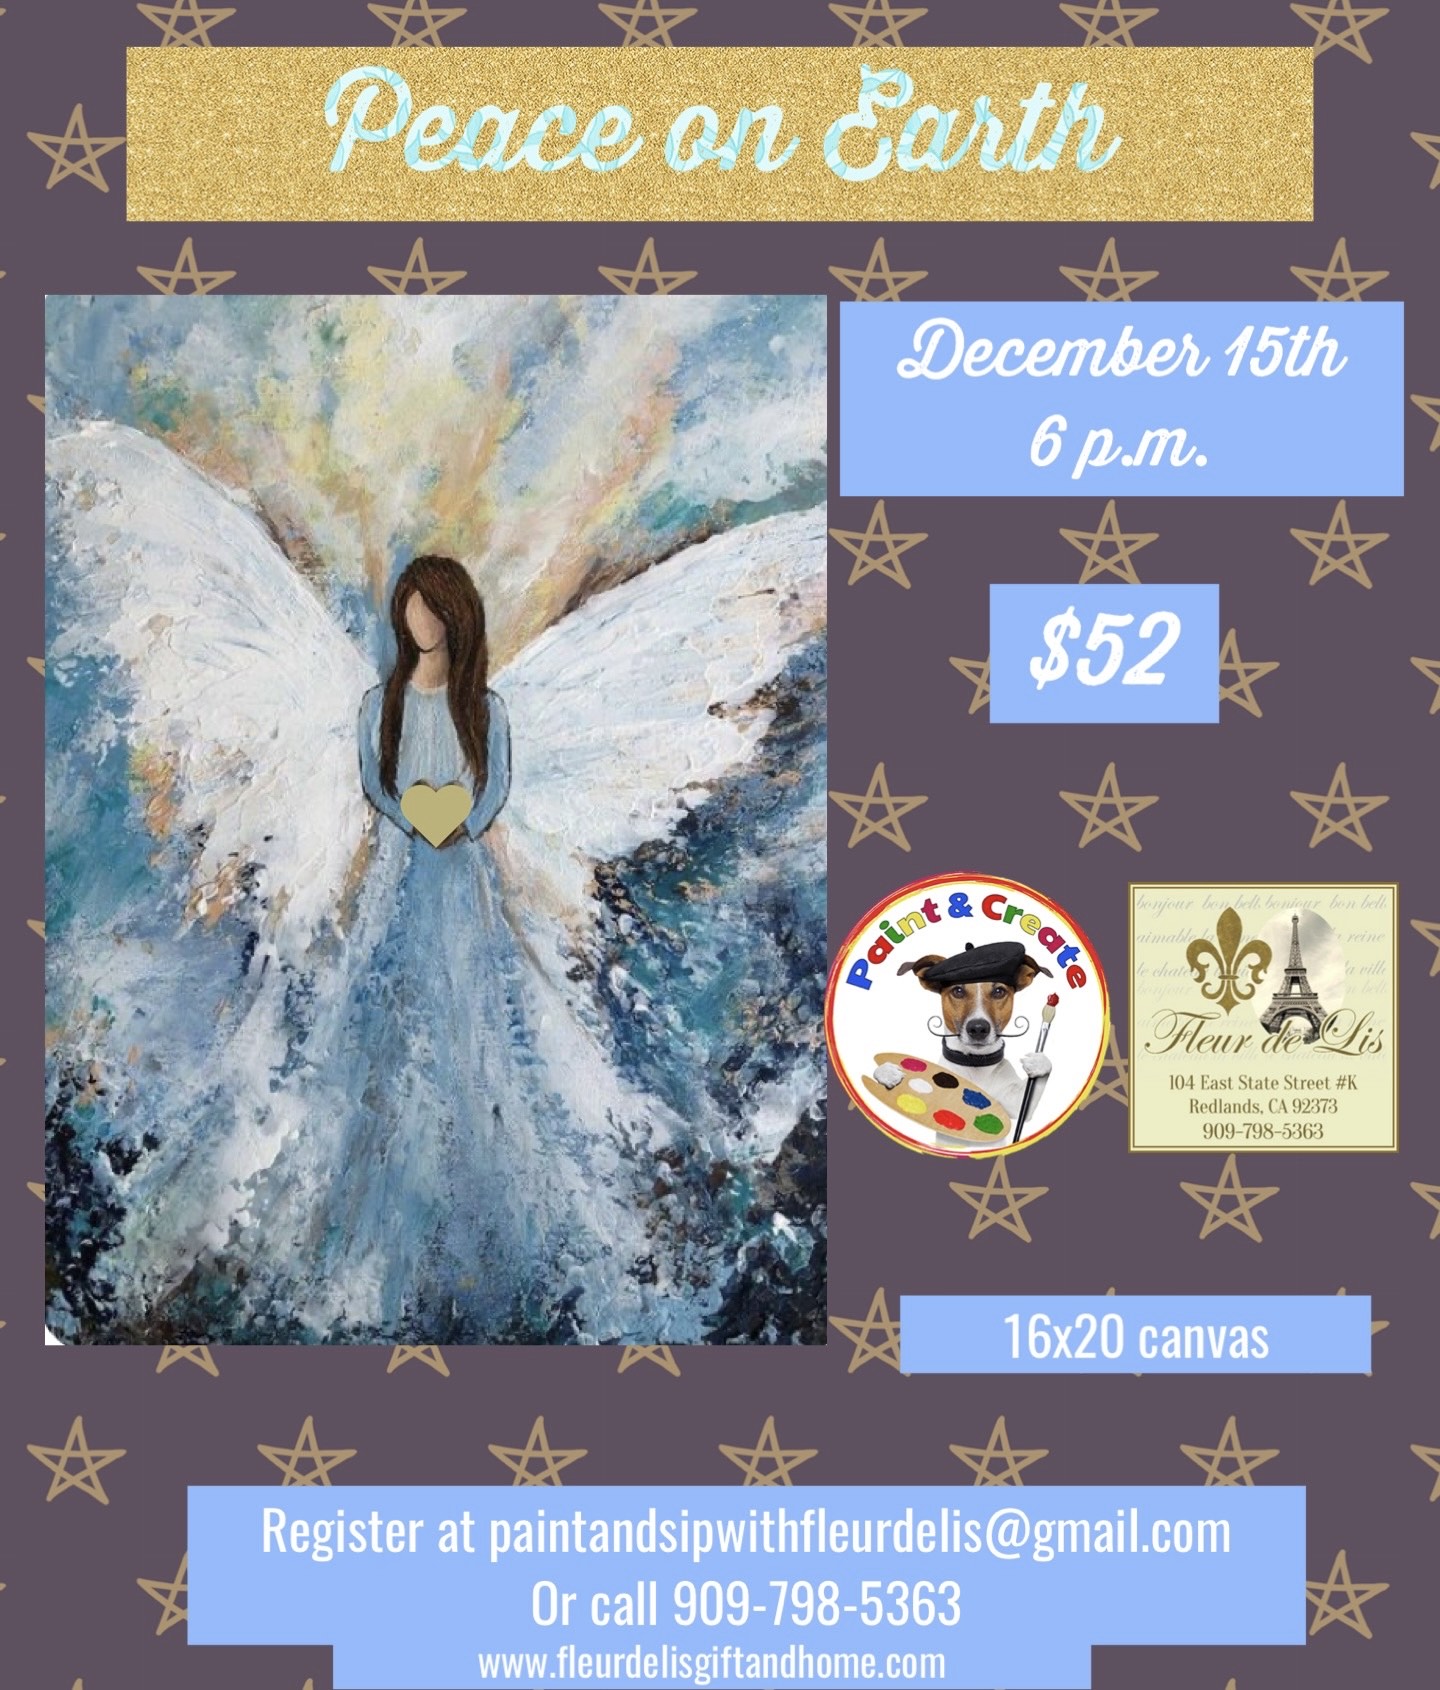 Peace on Earth December 15th 6 p.m.